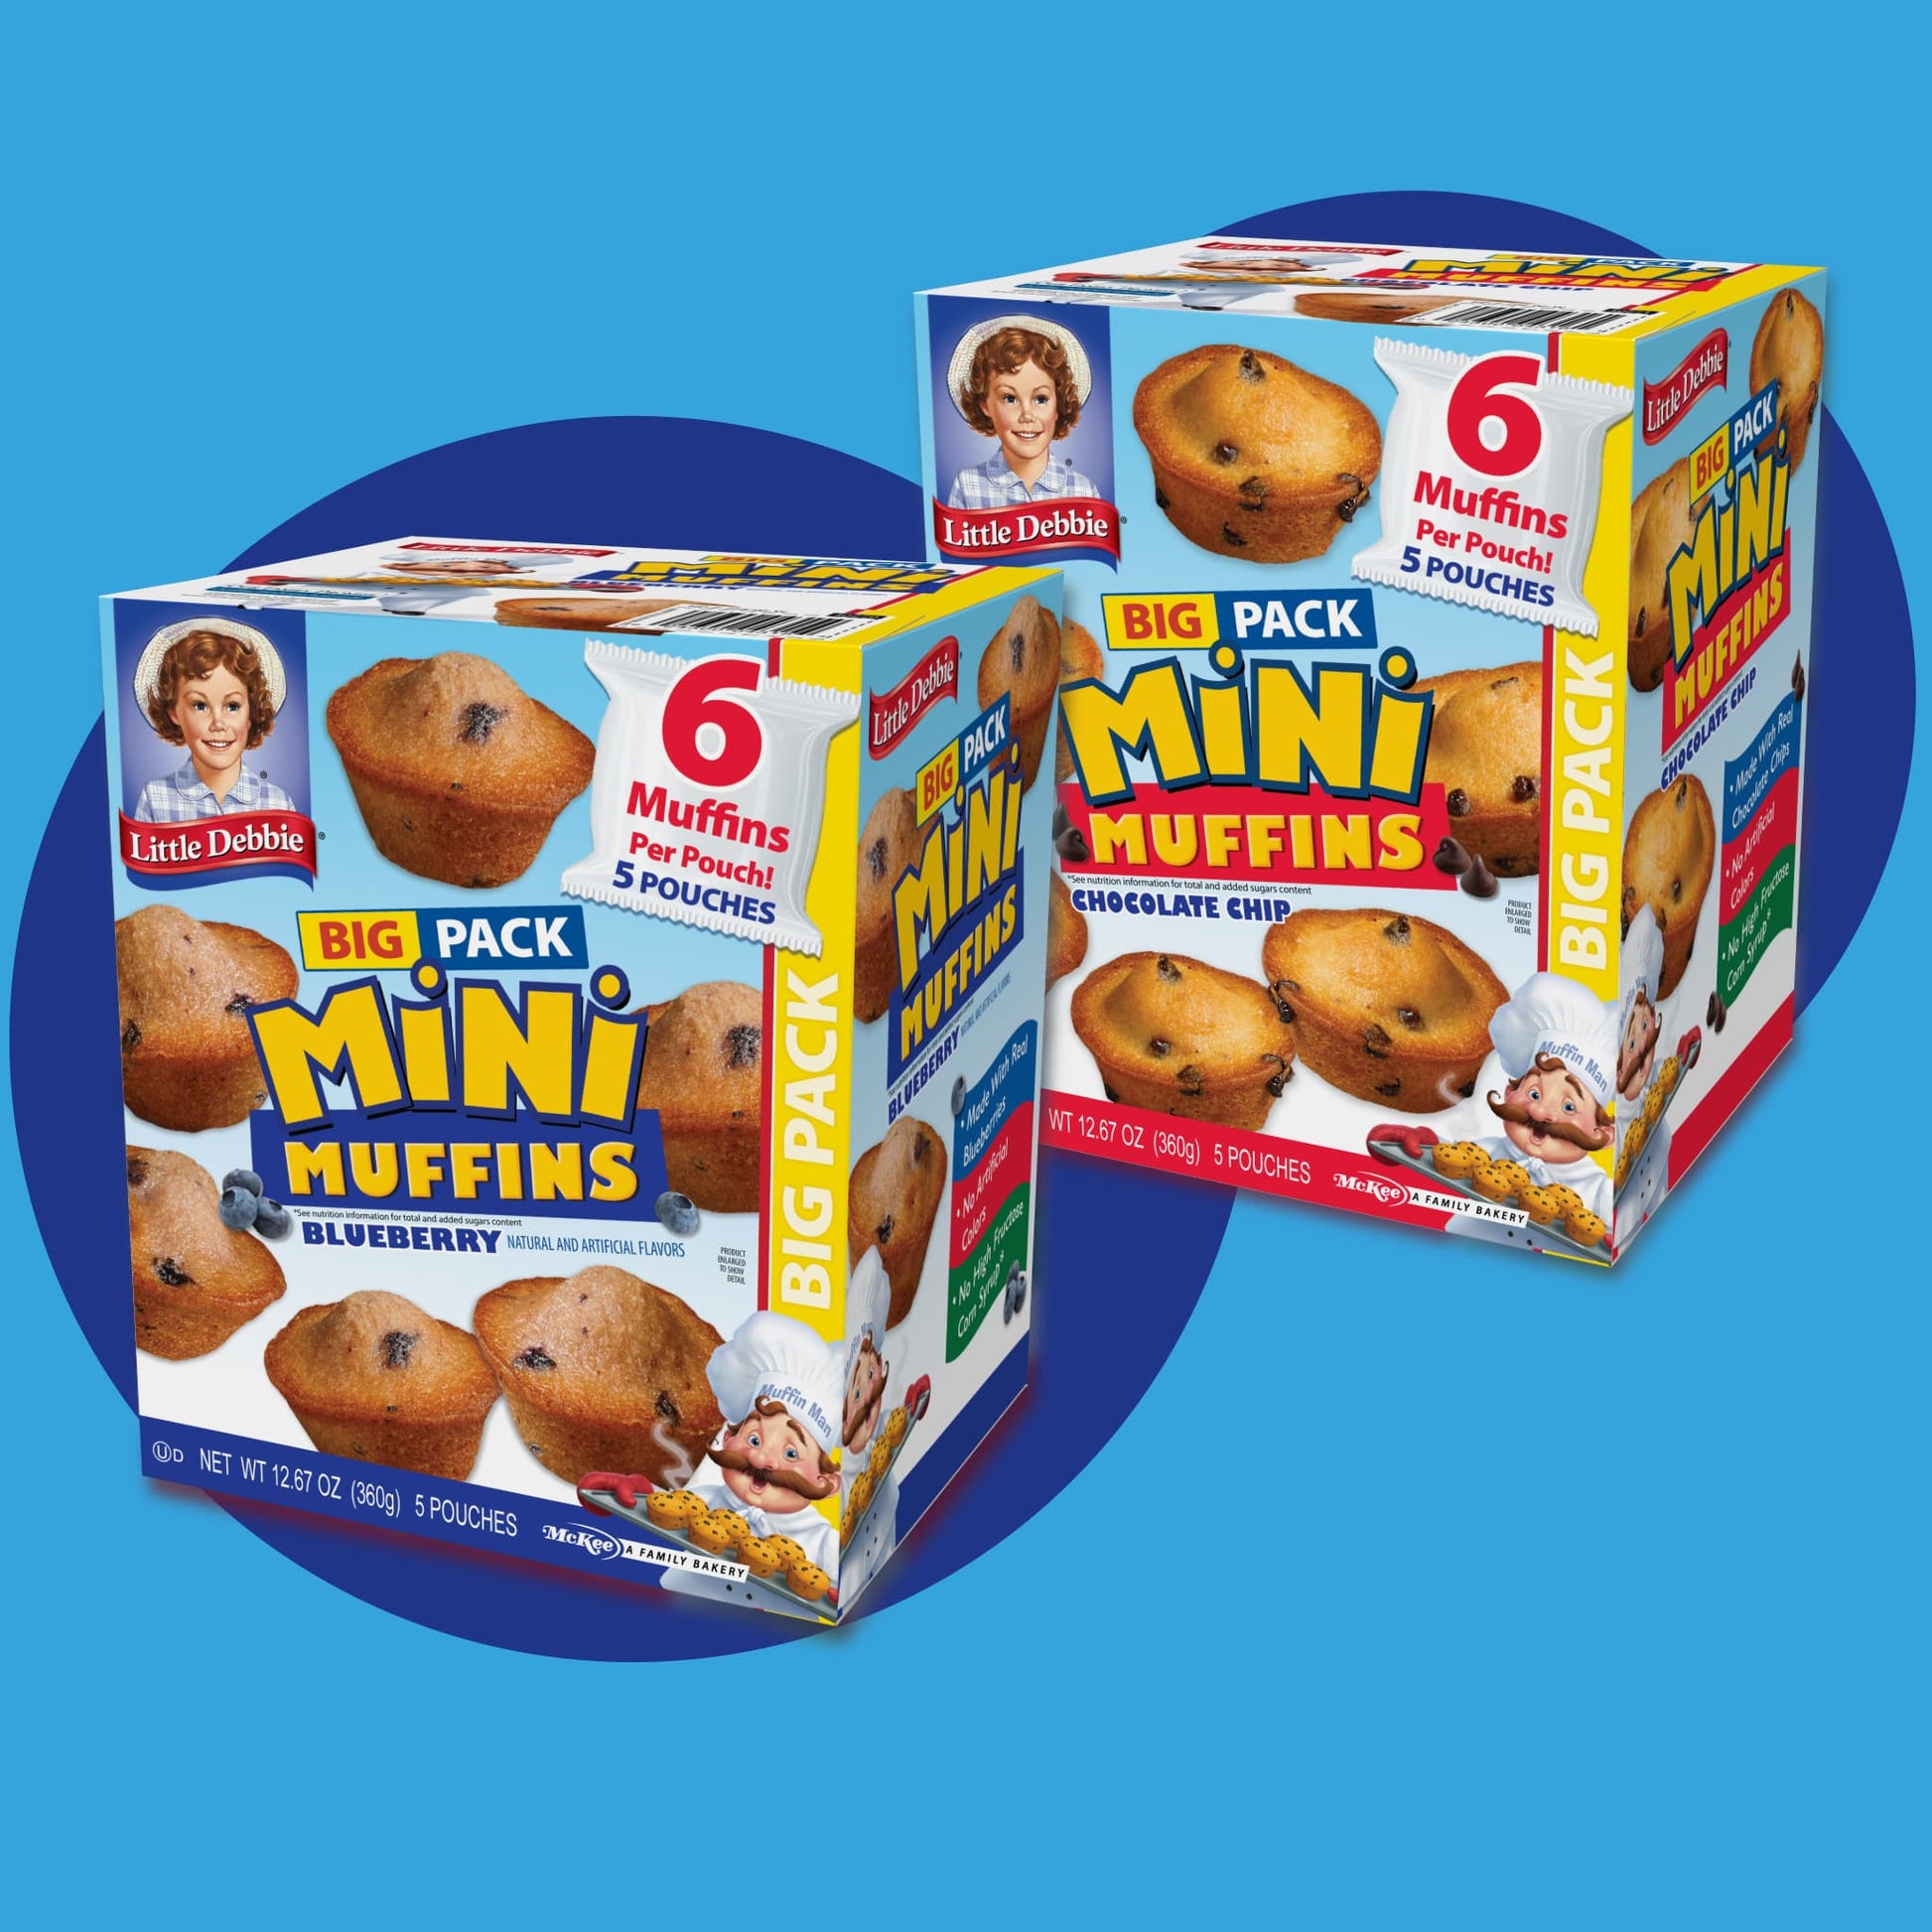 This is an image of the Too Big Mini Muffins pack. Two cartons of Little Debbie Big Pack Mini Muffins. A carton of Big Pack Blueberry Mini Muffins features 'Blueberry' flavor, and the Chocolate Chip Big Pack Mini Muffins features Chocolate Chips' Each box is prominently labeled with '6 Muffins Per Pouch, 5 Pouches' indicating the package contents. The brand's logo is visible on the top left of the boxes. 